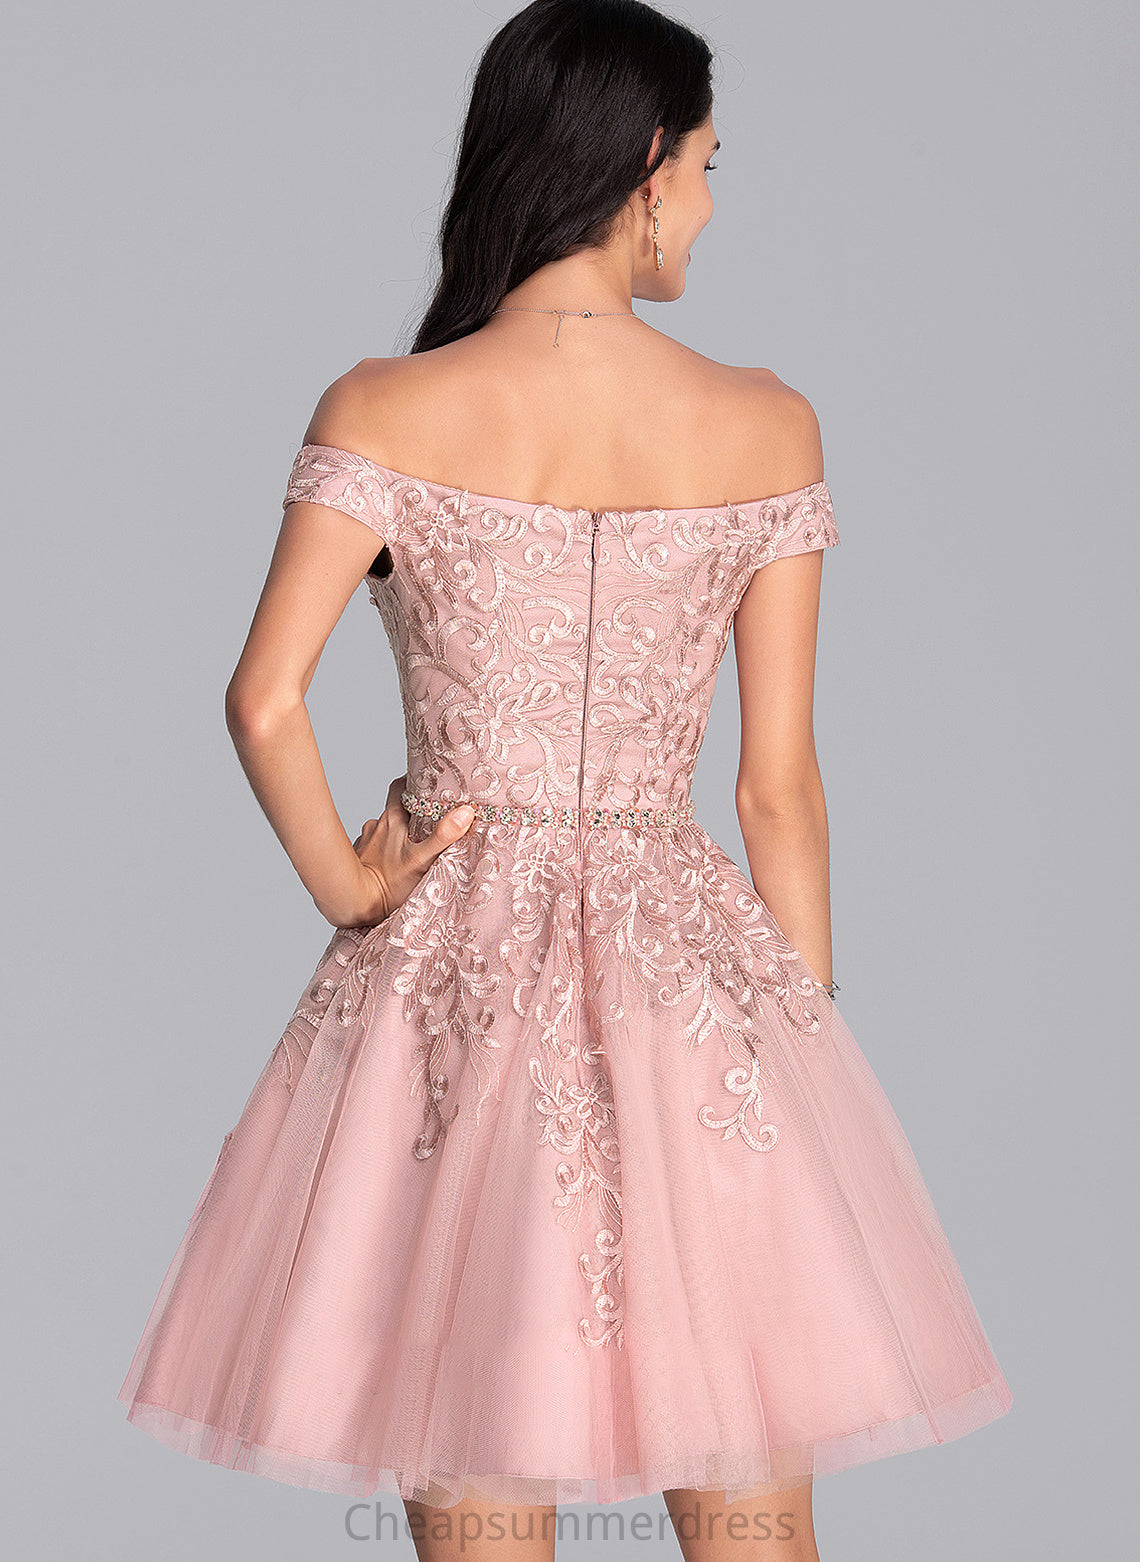 Tulle With Beading Sequins Prom Dresses Tiara A-Line Short/Mini Off-the-Shoulder